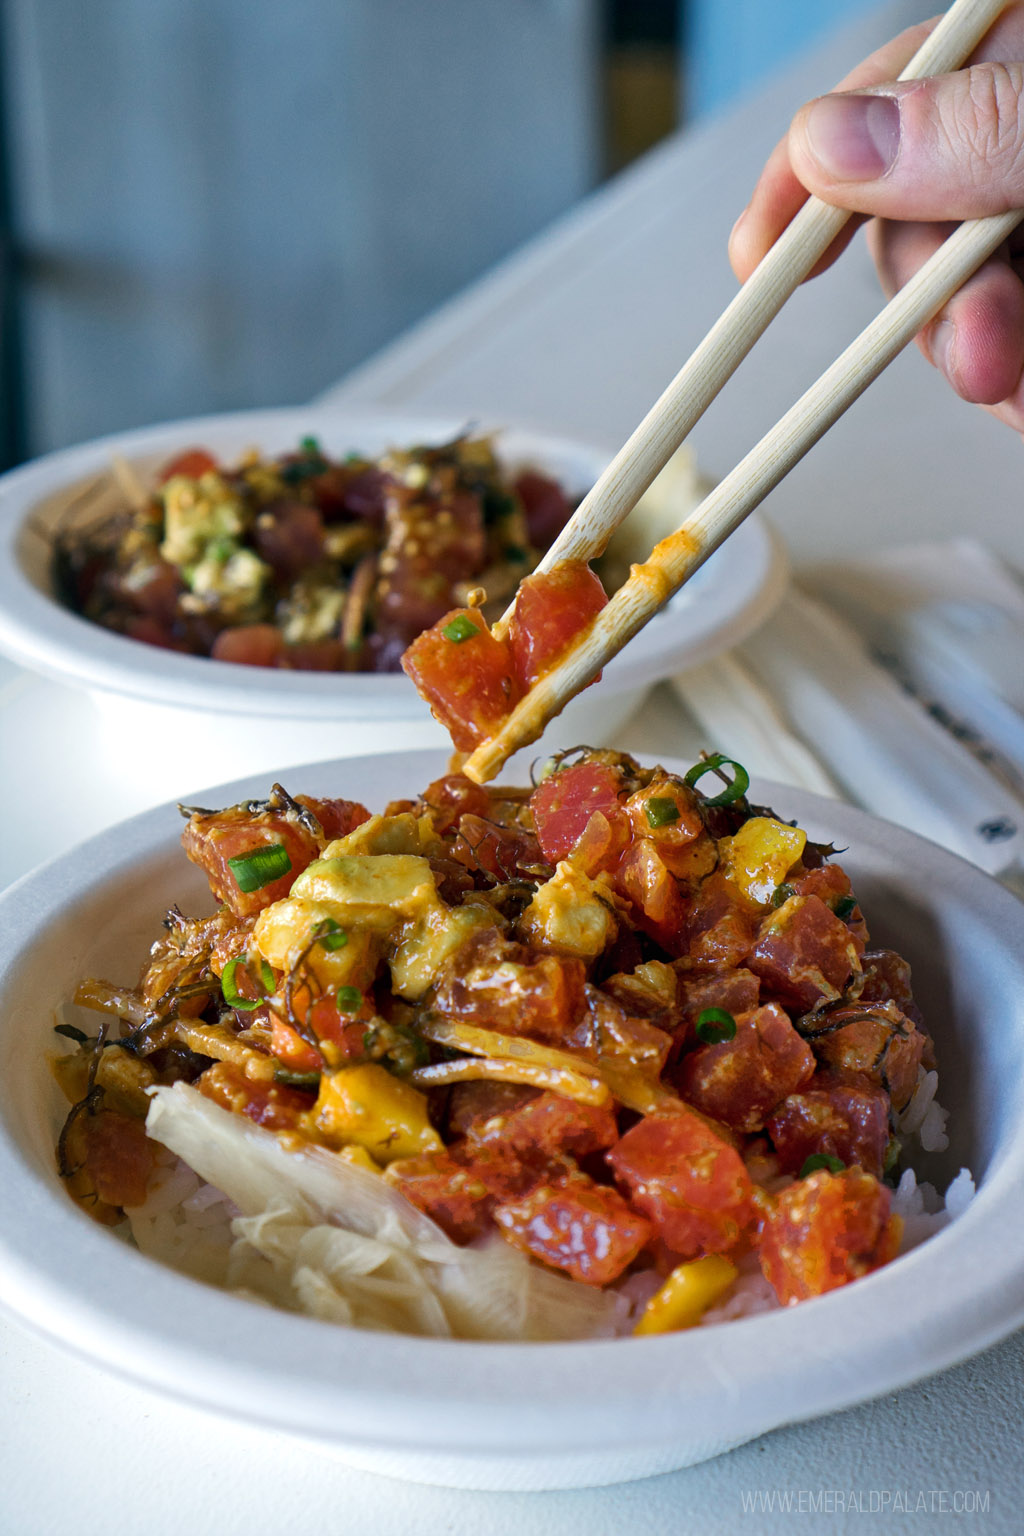 Hawaiian poke being picked up with chopsticks